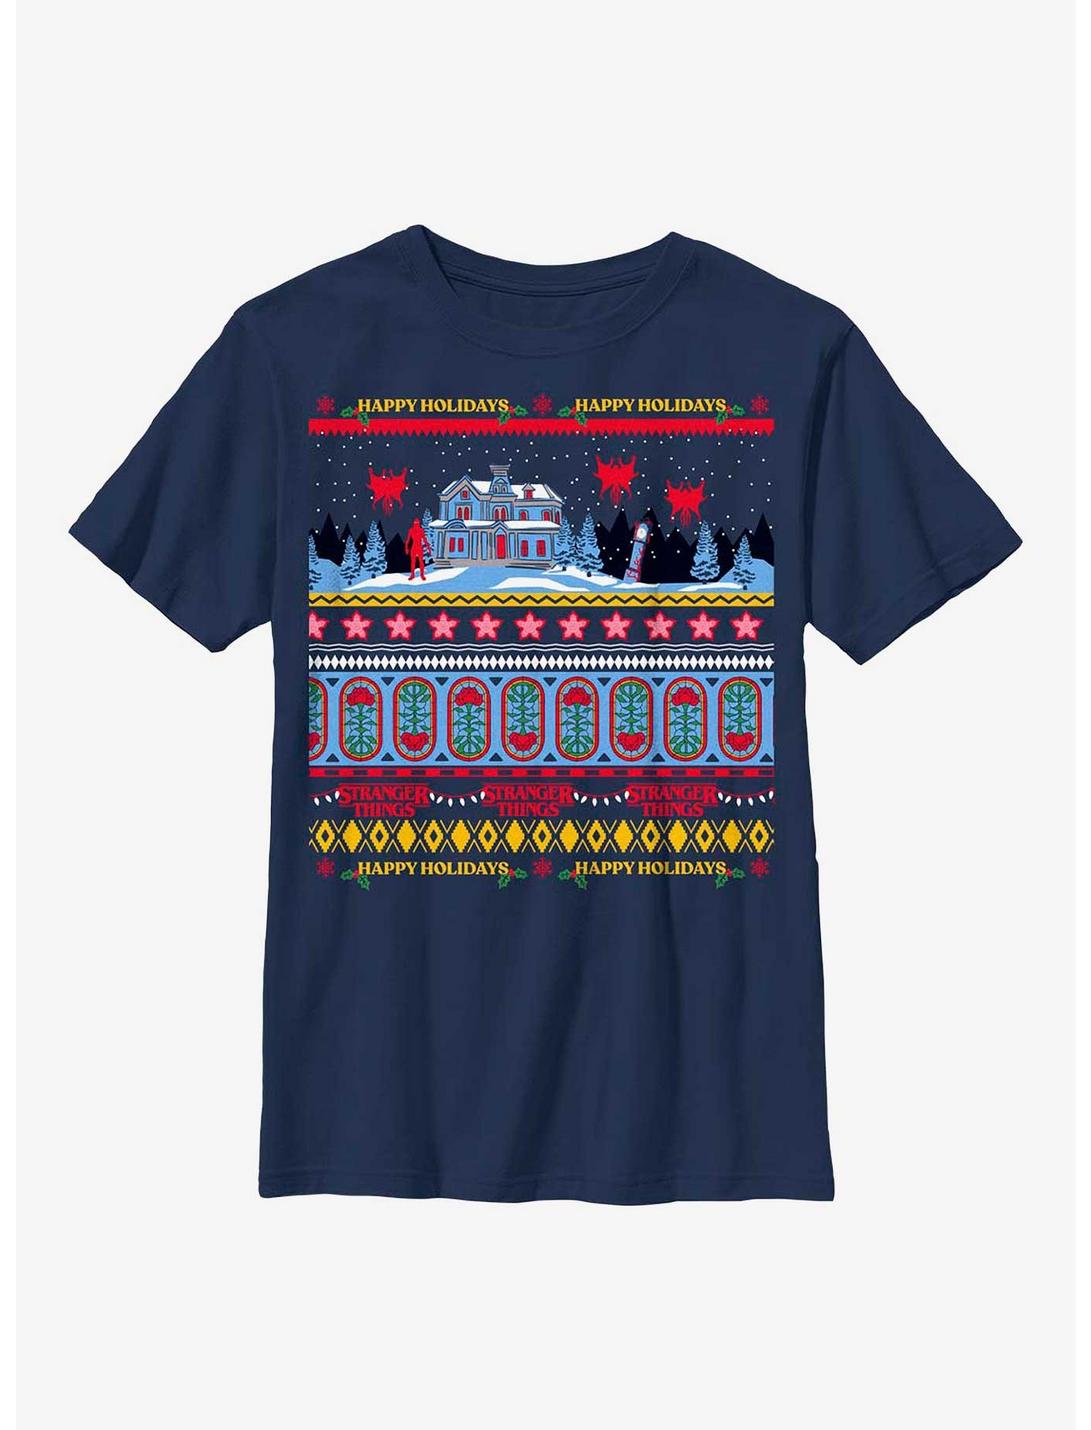 Stranger Things Creel House Ugly Sweater Youth T-Shirt, NAVY, hi-res